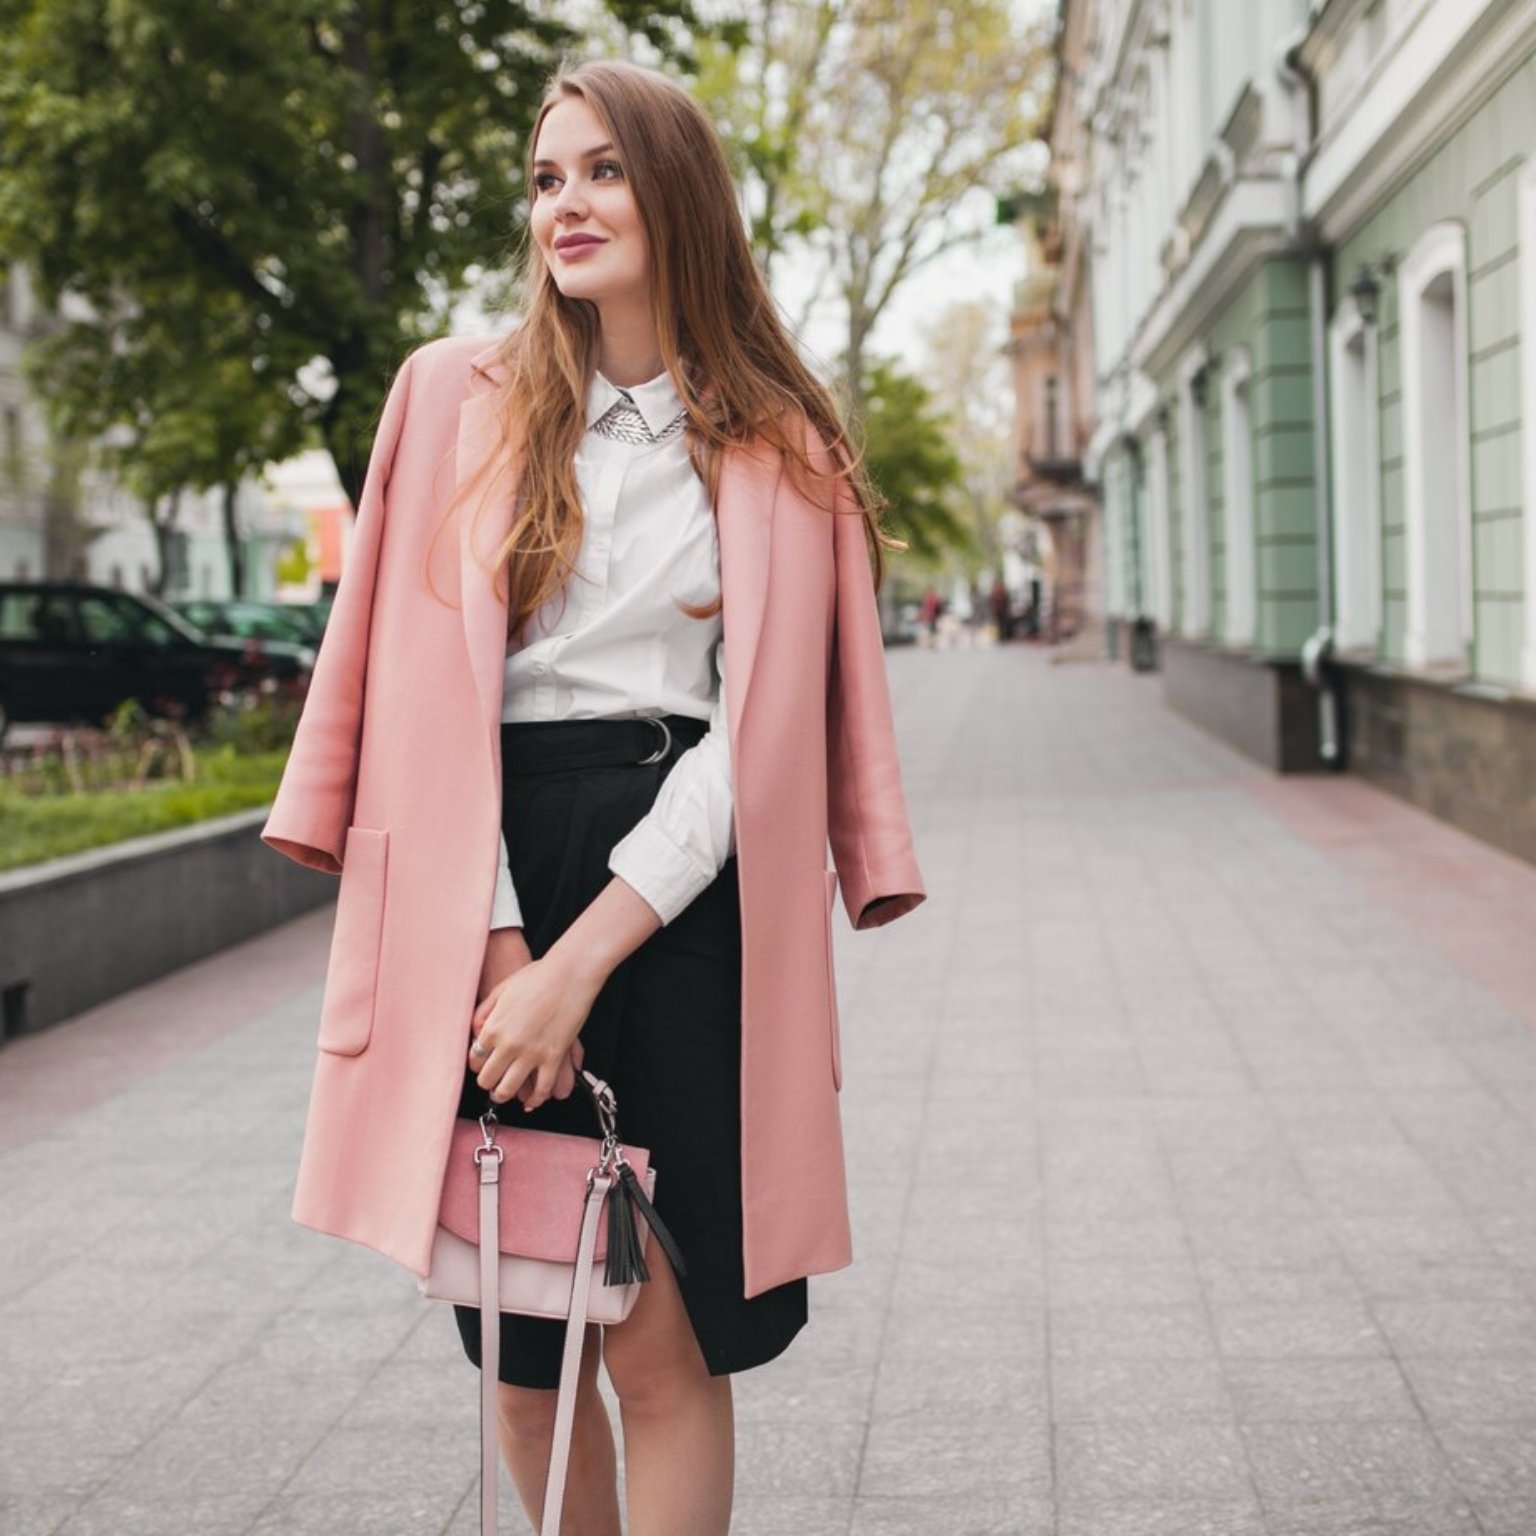 cute-attractive-stylish-smiling-woman-walking-city-street-pink-coat_285396-1408